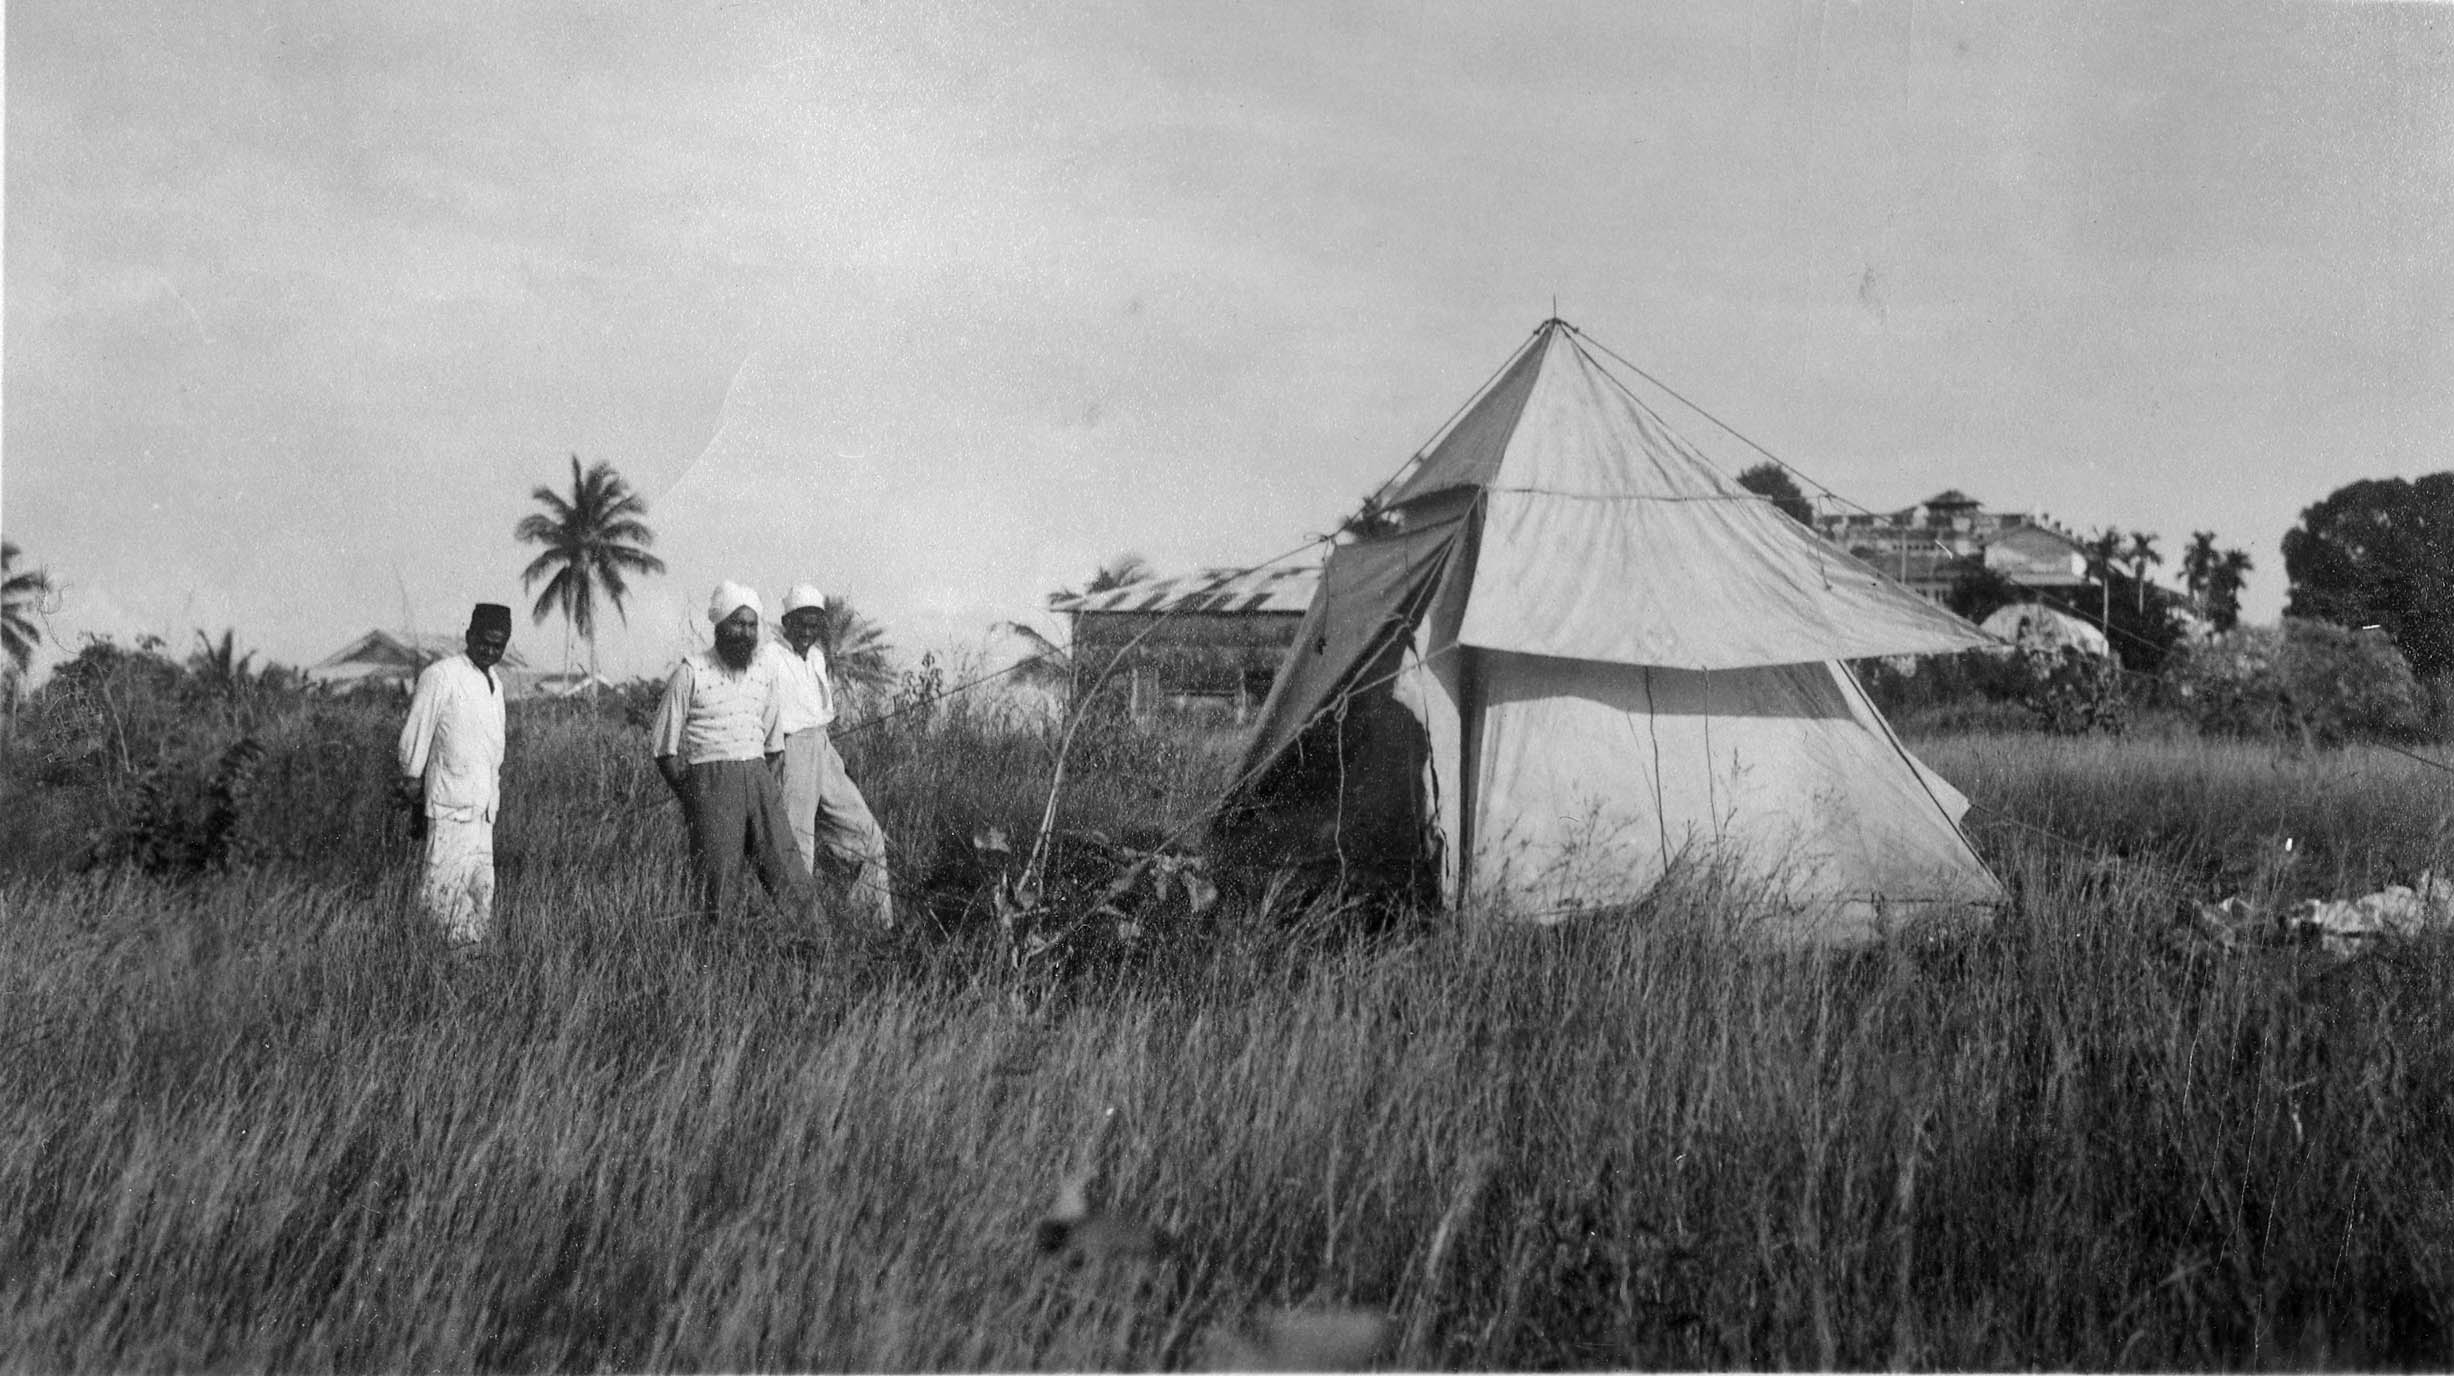 Robert Mansfield's magnetic station at Chukwani on Unguja Island, Zanzibar, 2 October 1934. A contingent of police was needed to control curious on-lookers whilst he established a new station behind the old Sultan's palace. Image: Carnegie Institution of Washington, Department of Terrestrial Magnetism.